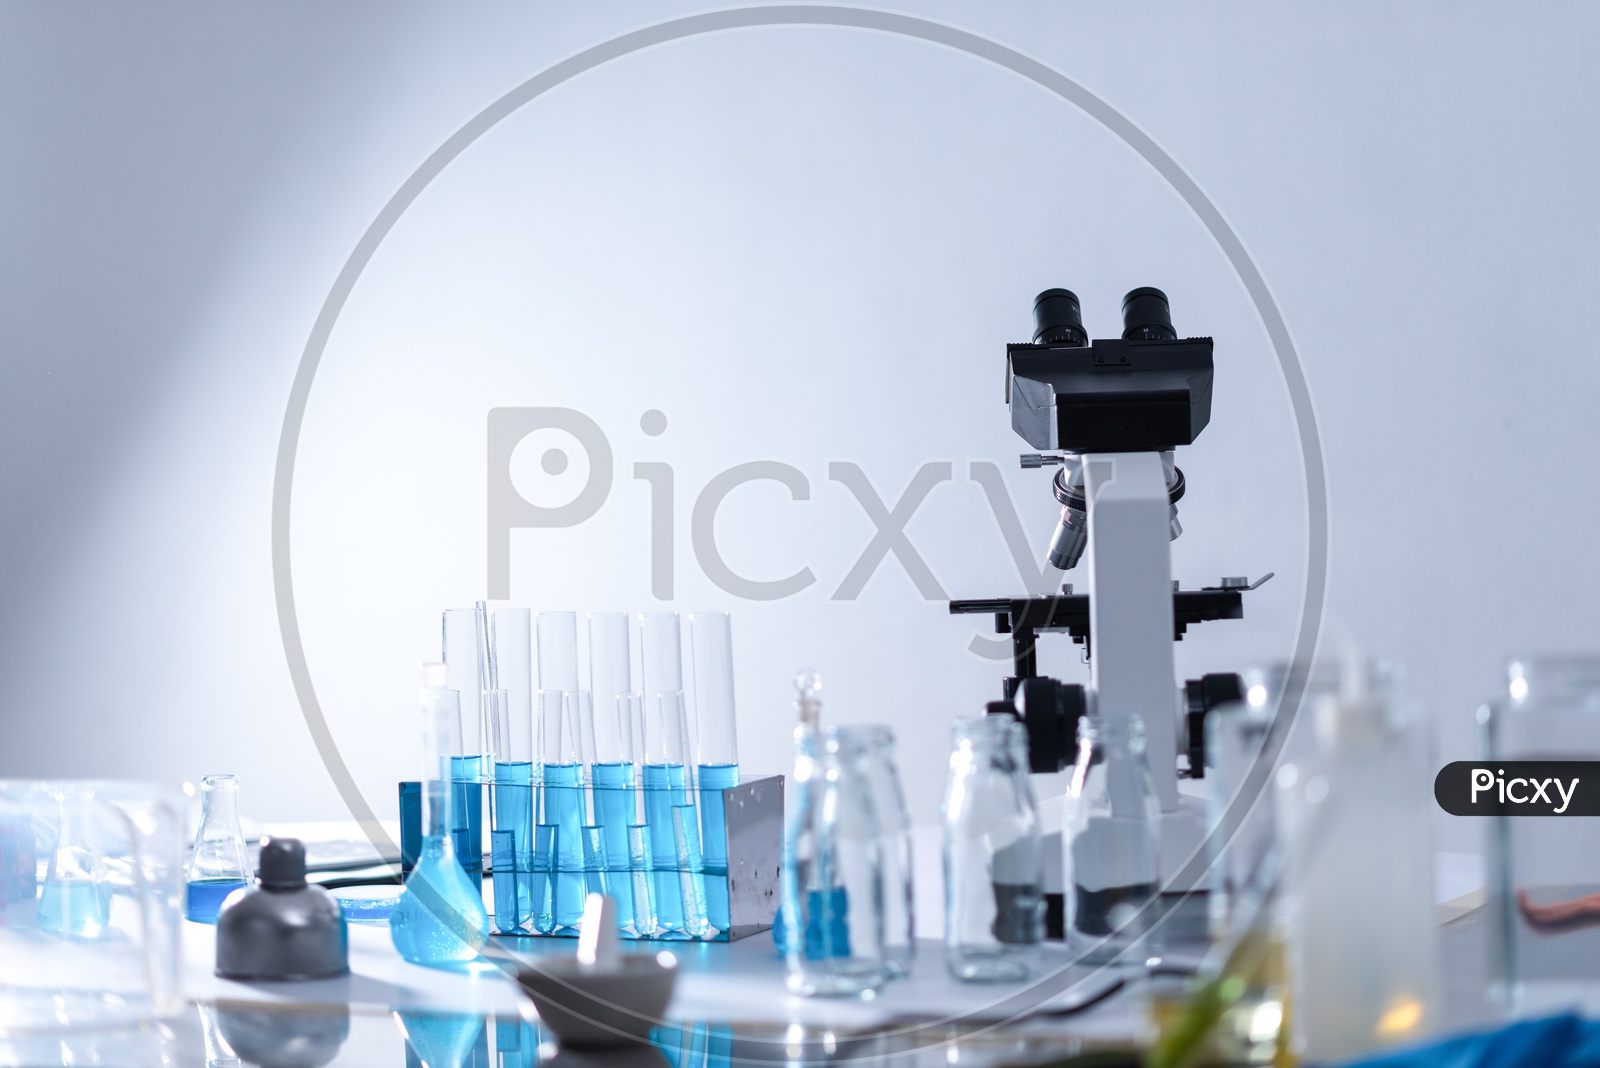 Chemical Solutions in Test Tube, Laboratory Equipment